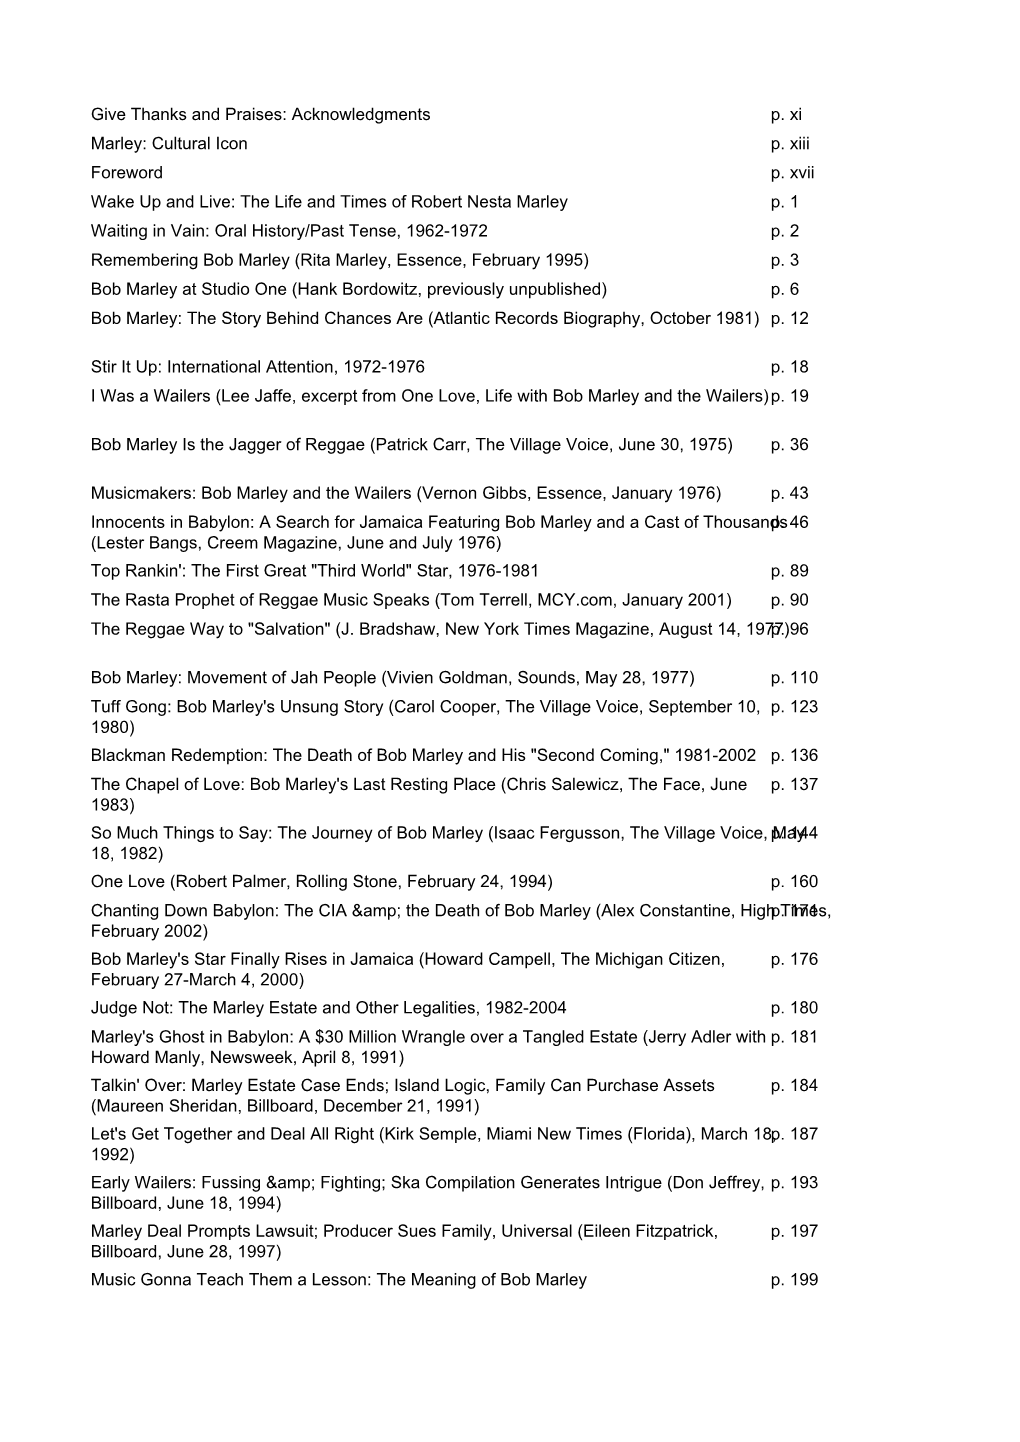 Table of Contents Provided by Blackwell's Book Services and R.R